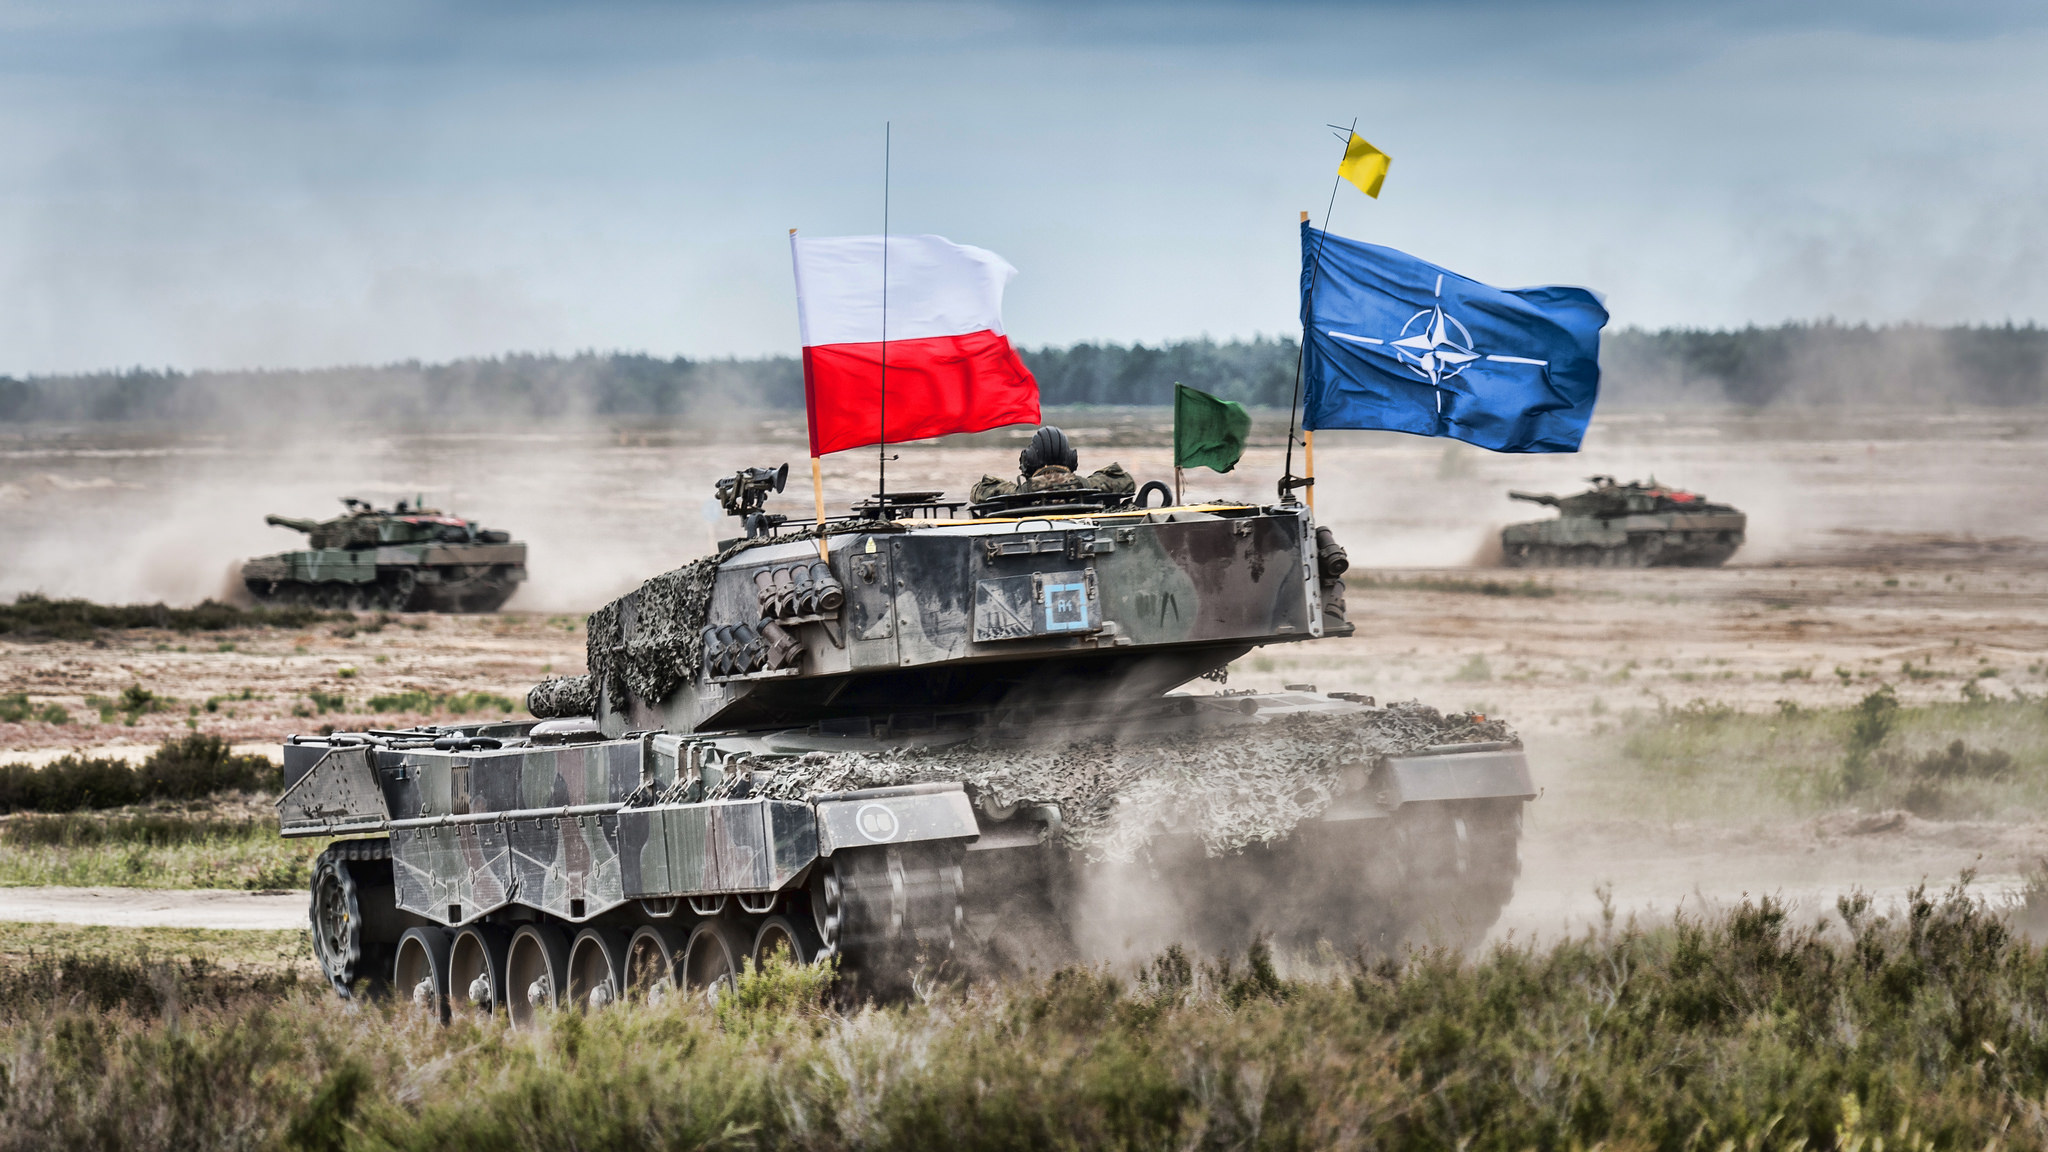 US Basing in Poland and NATO’s Mobility Challenge